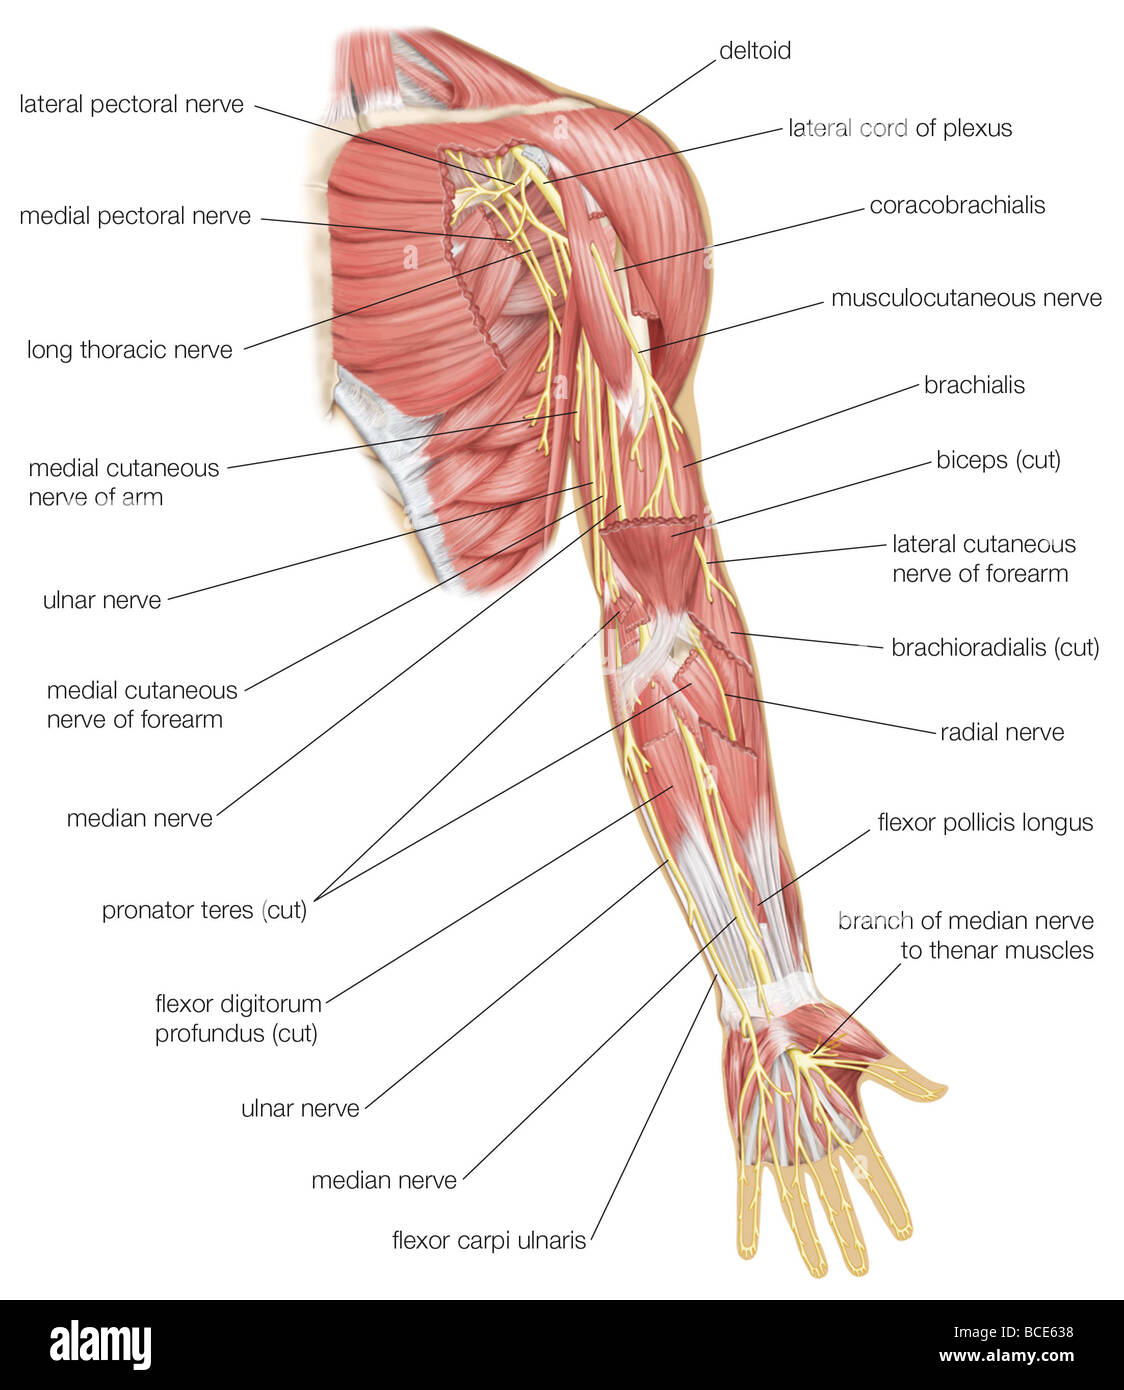 Anterior View Of The Left Arm Showing Median Ulnar And Radial Nerves